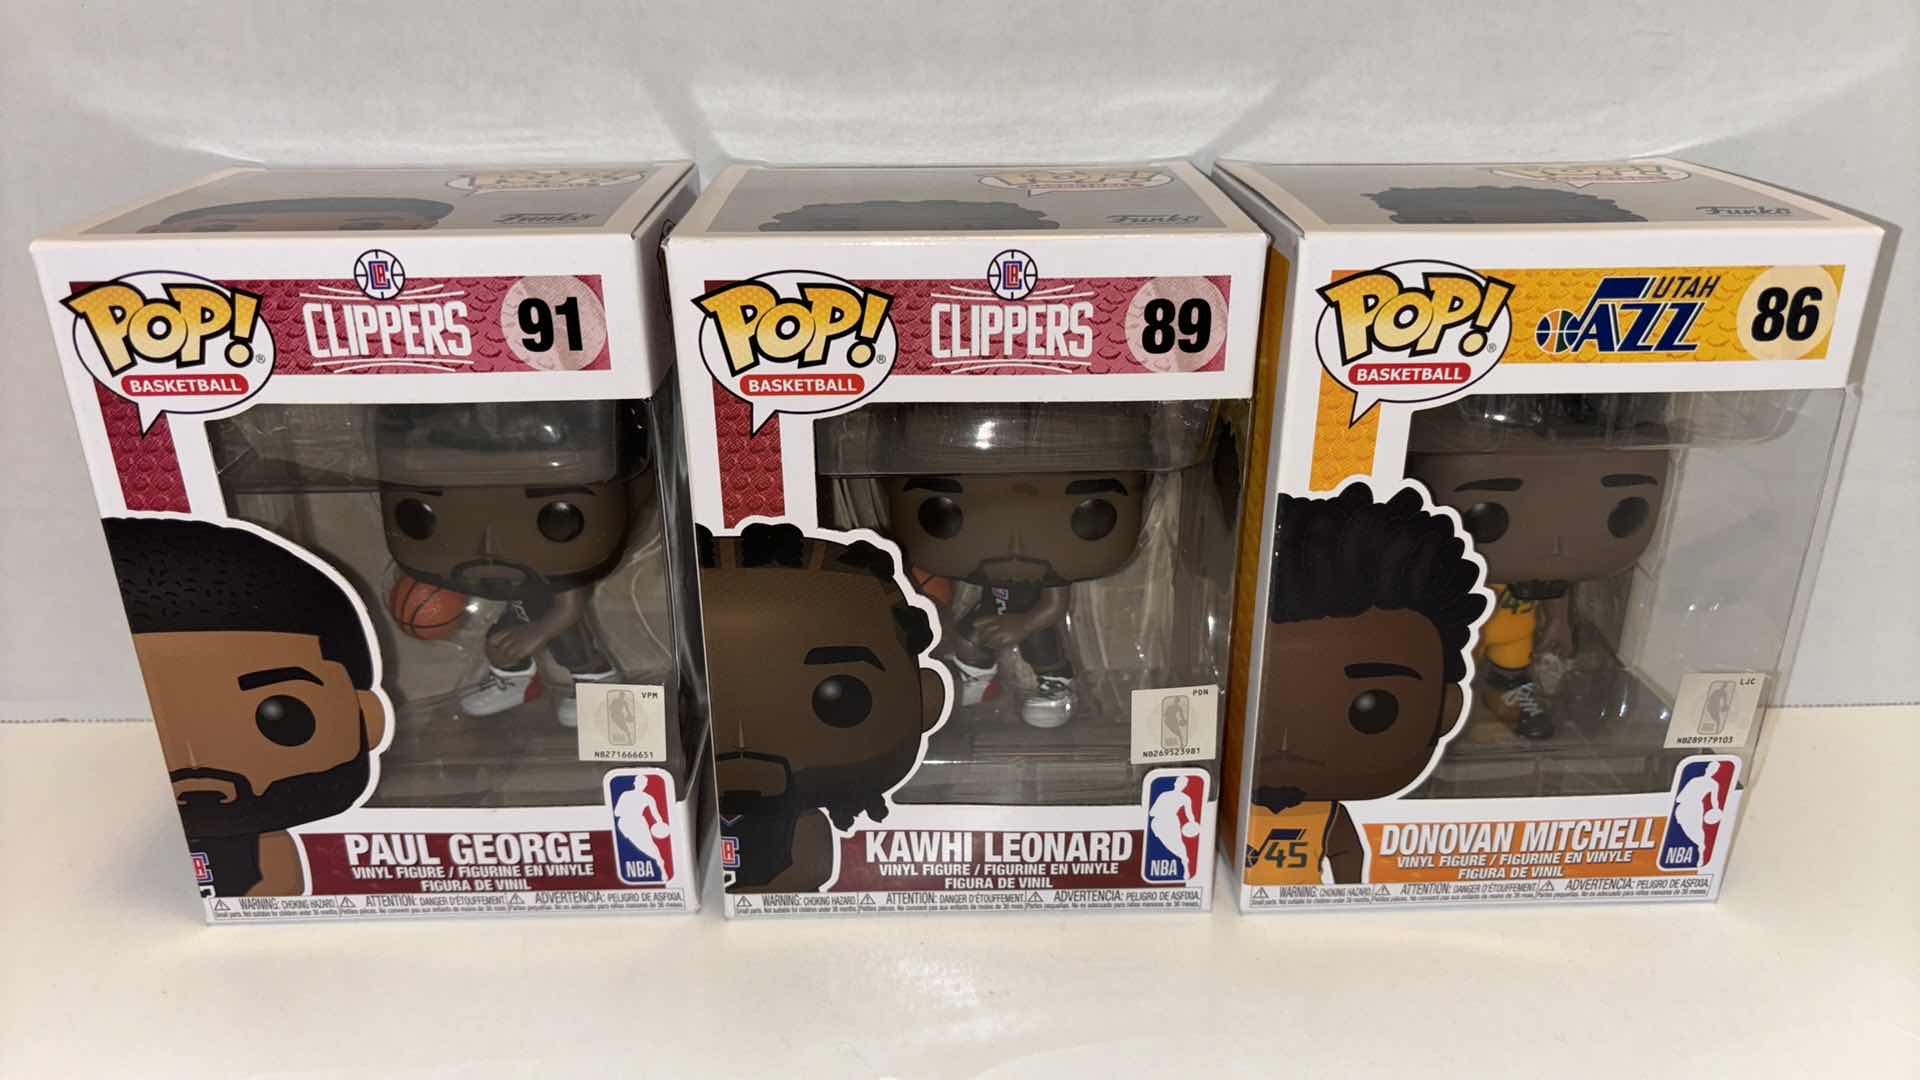 Photo 1 of NEW FUNKO POP! BASKETBALL VINYL FIGURE MIXED 6-PACK, CLIPPERS #91 PAUL GEORGE (3), CLIPPERS #89 KAWHI LEONARD (2), JAZZ #86 DONOVAN MITCHELL (1)